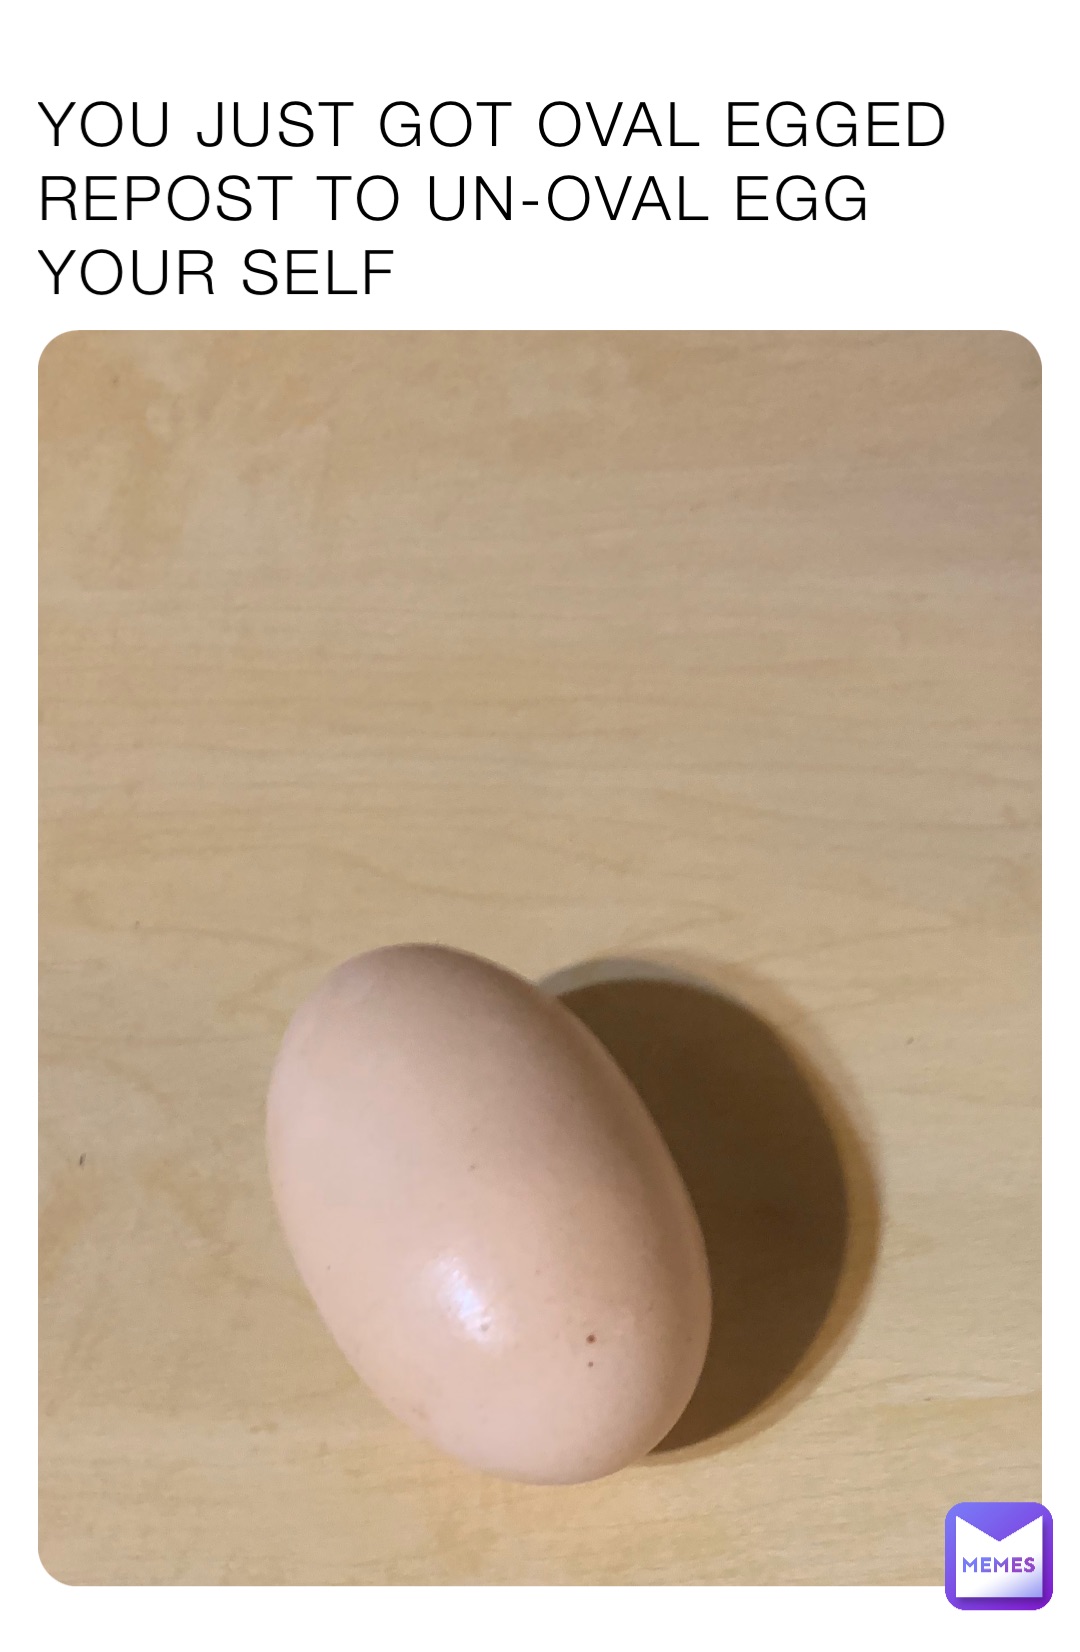 YOU JUST GOT OVAL EGGED REPOST TO UN-OVAL EGG YOUR SELF